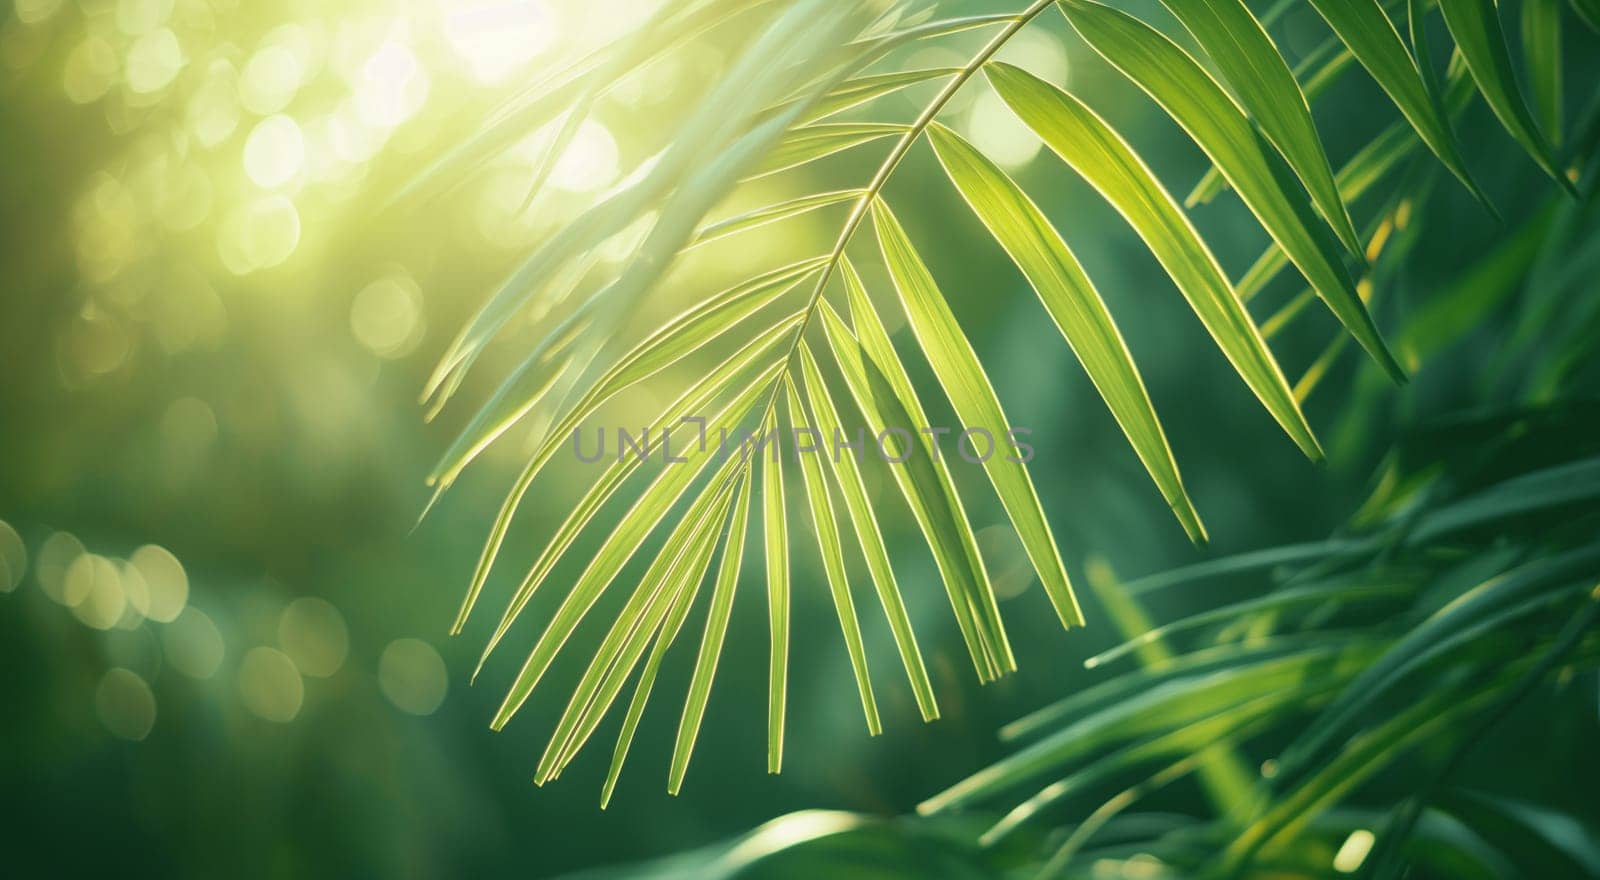 Lush green palm leaves basking in soft sunlight, depicting a tranquil natural setting by kizuneko